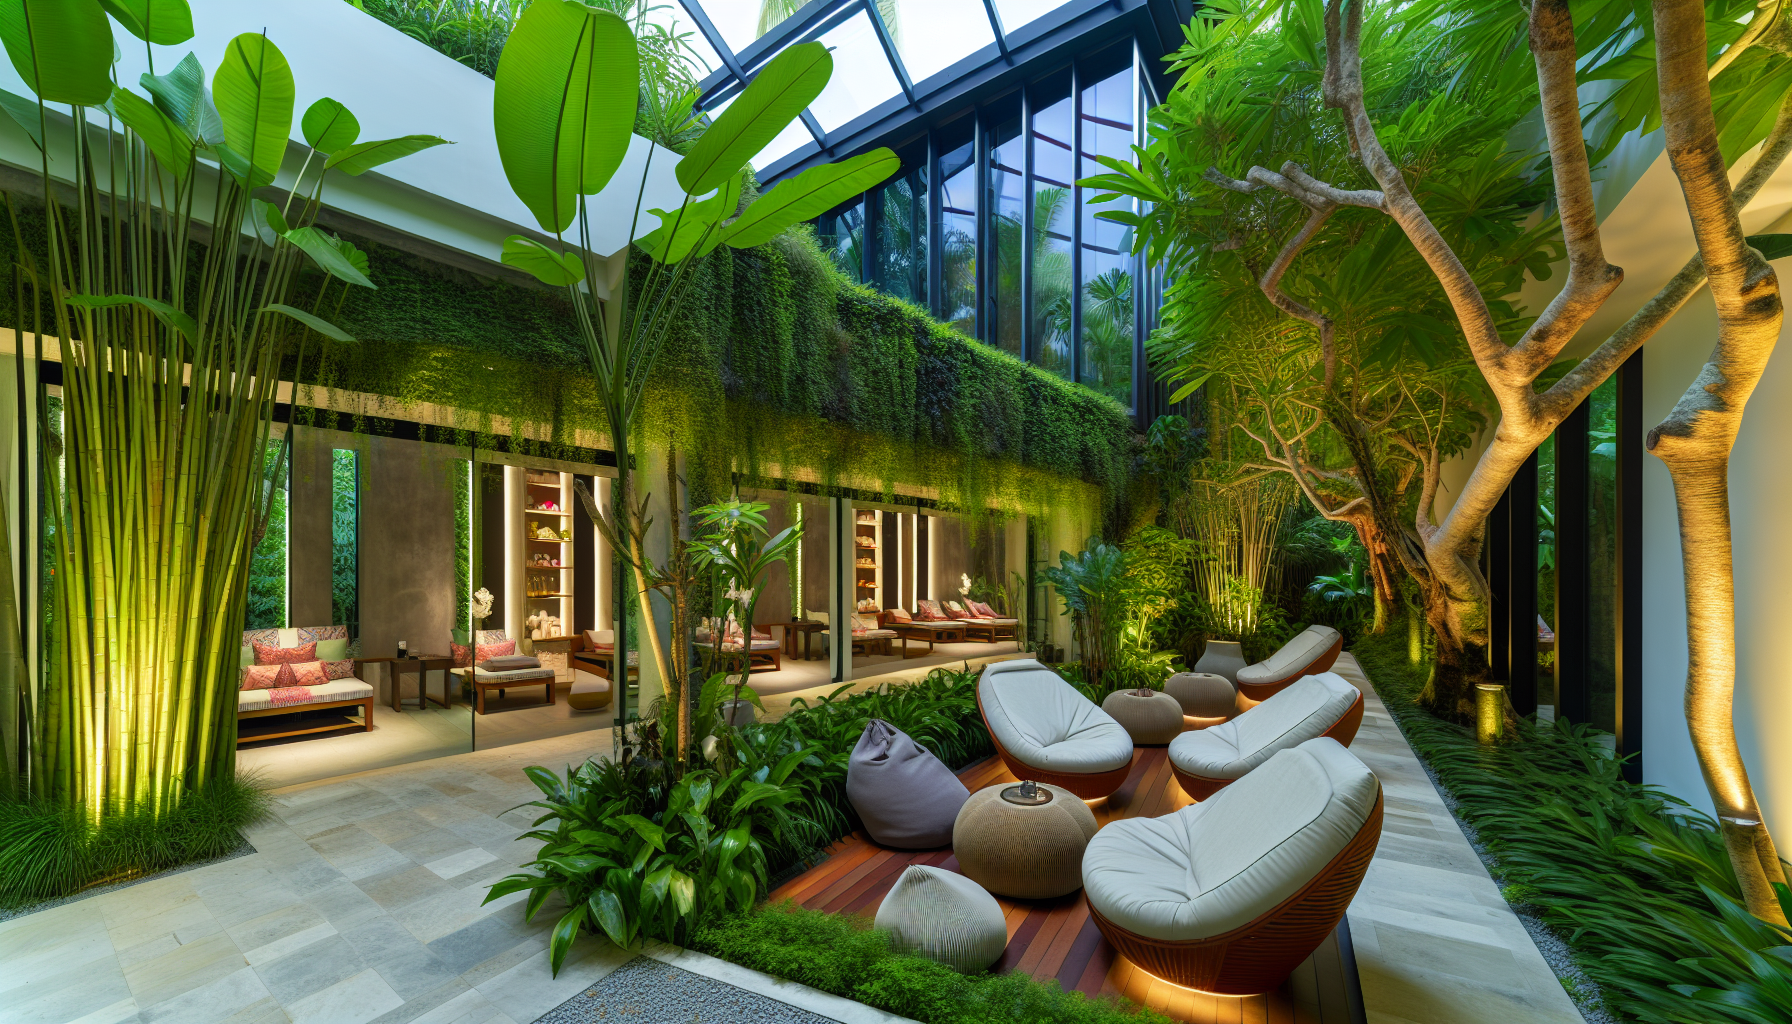 Tranquil spa with lush greenery and relaxation area